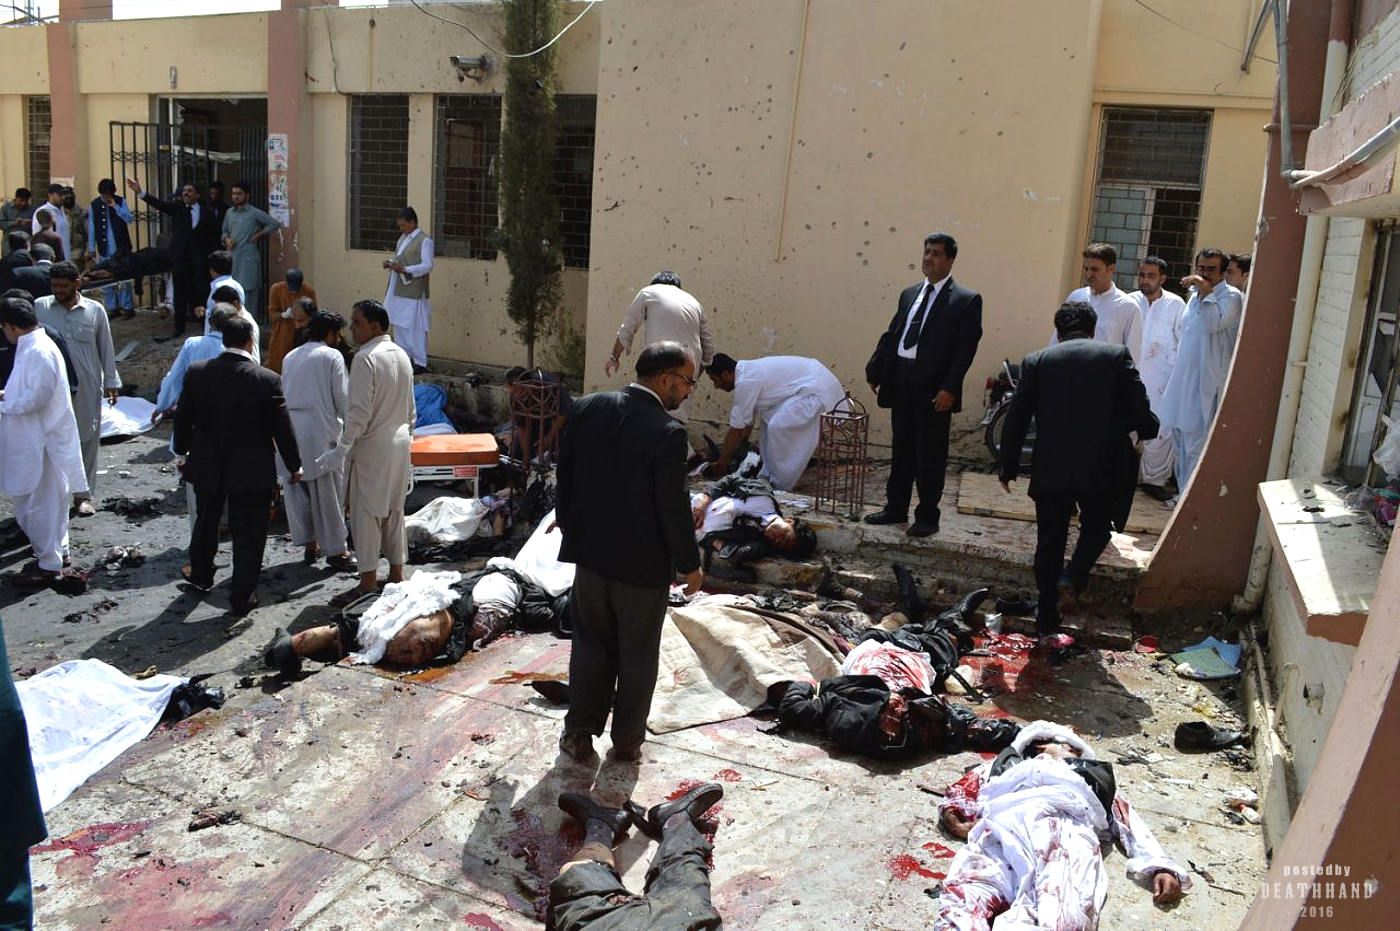 lawyer-killed-mourners-at-hospital-hit-by-suicide-bomber-2-Quetta-PK-aug-8-16.jpg